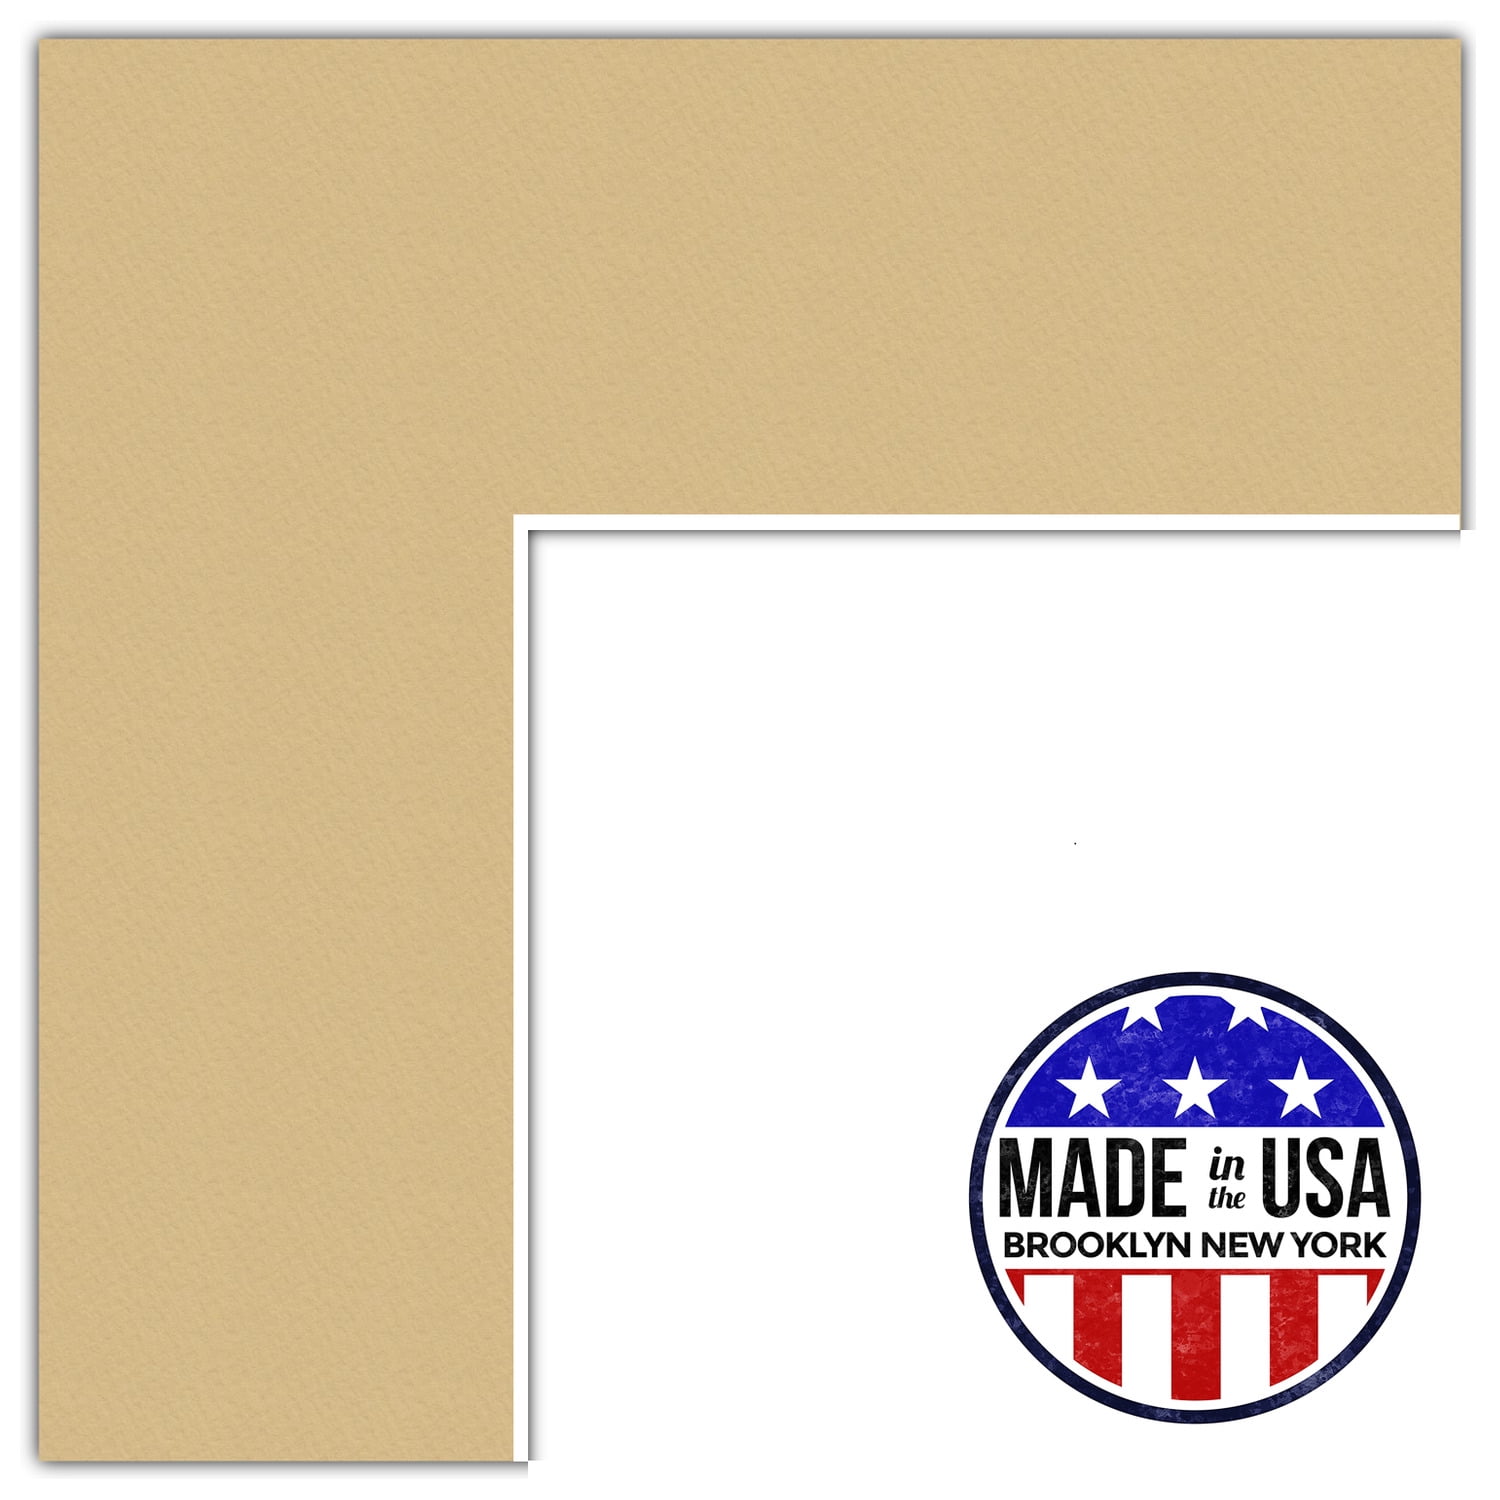 Picture Framing Mat 11x14 for 8x10 photo and sports card Autumn Beige and white 